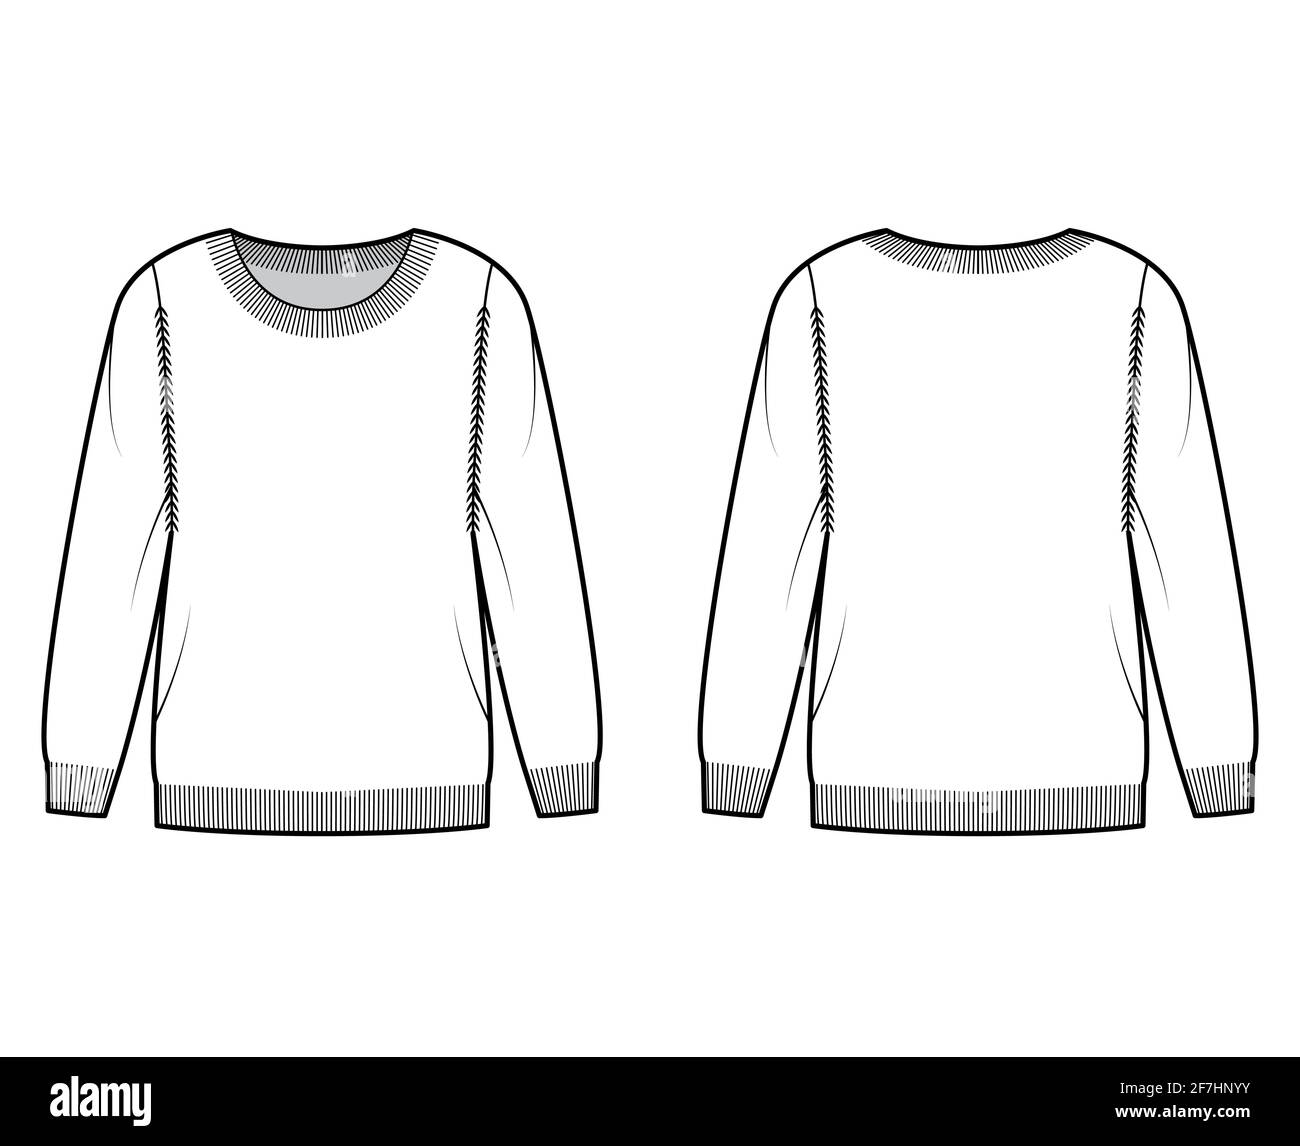 Sweater technical fashion illustration with round neck, long sleeves ...